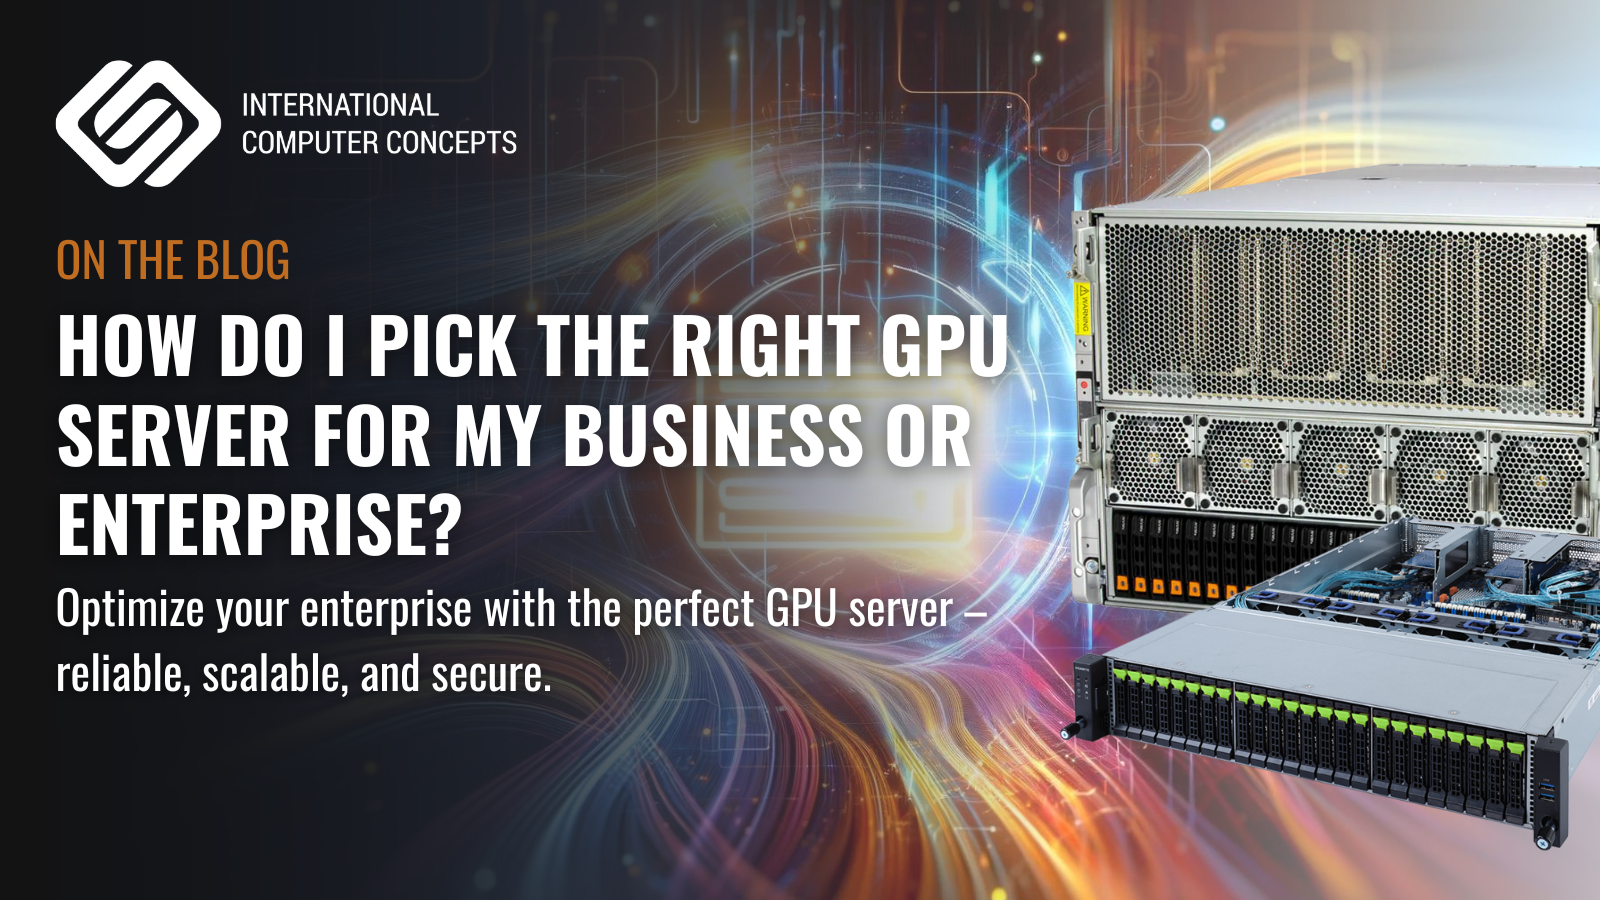 How do I pick the right GPU server for my business or enterprise?